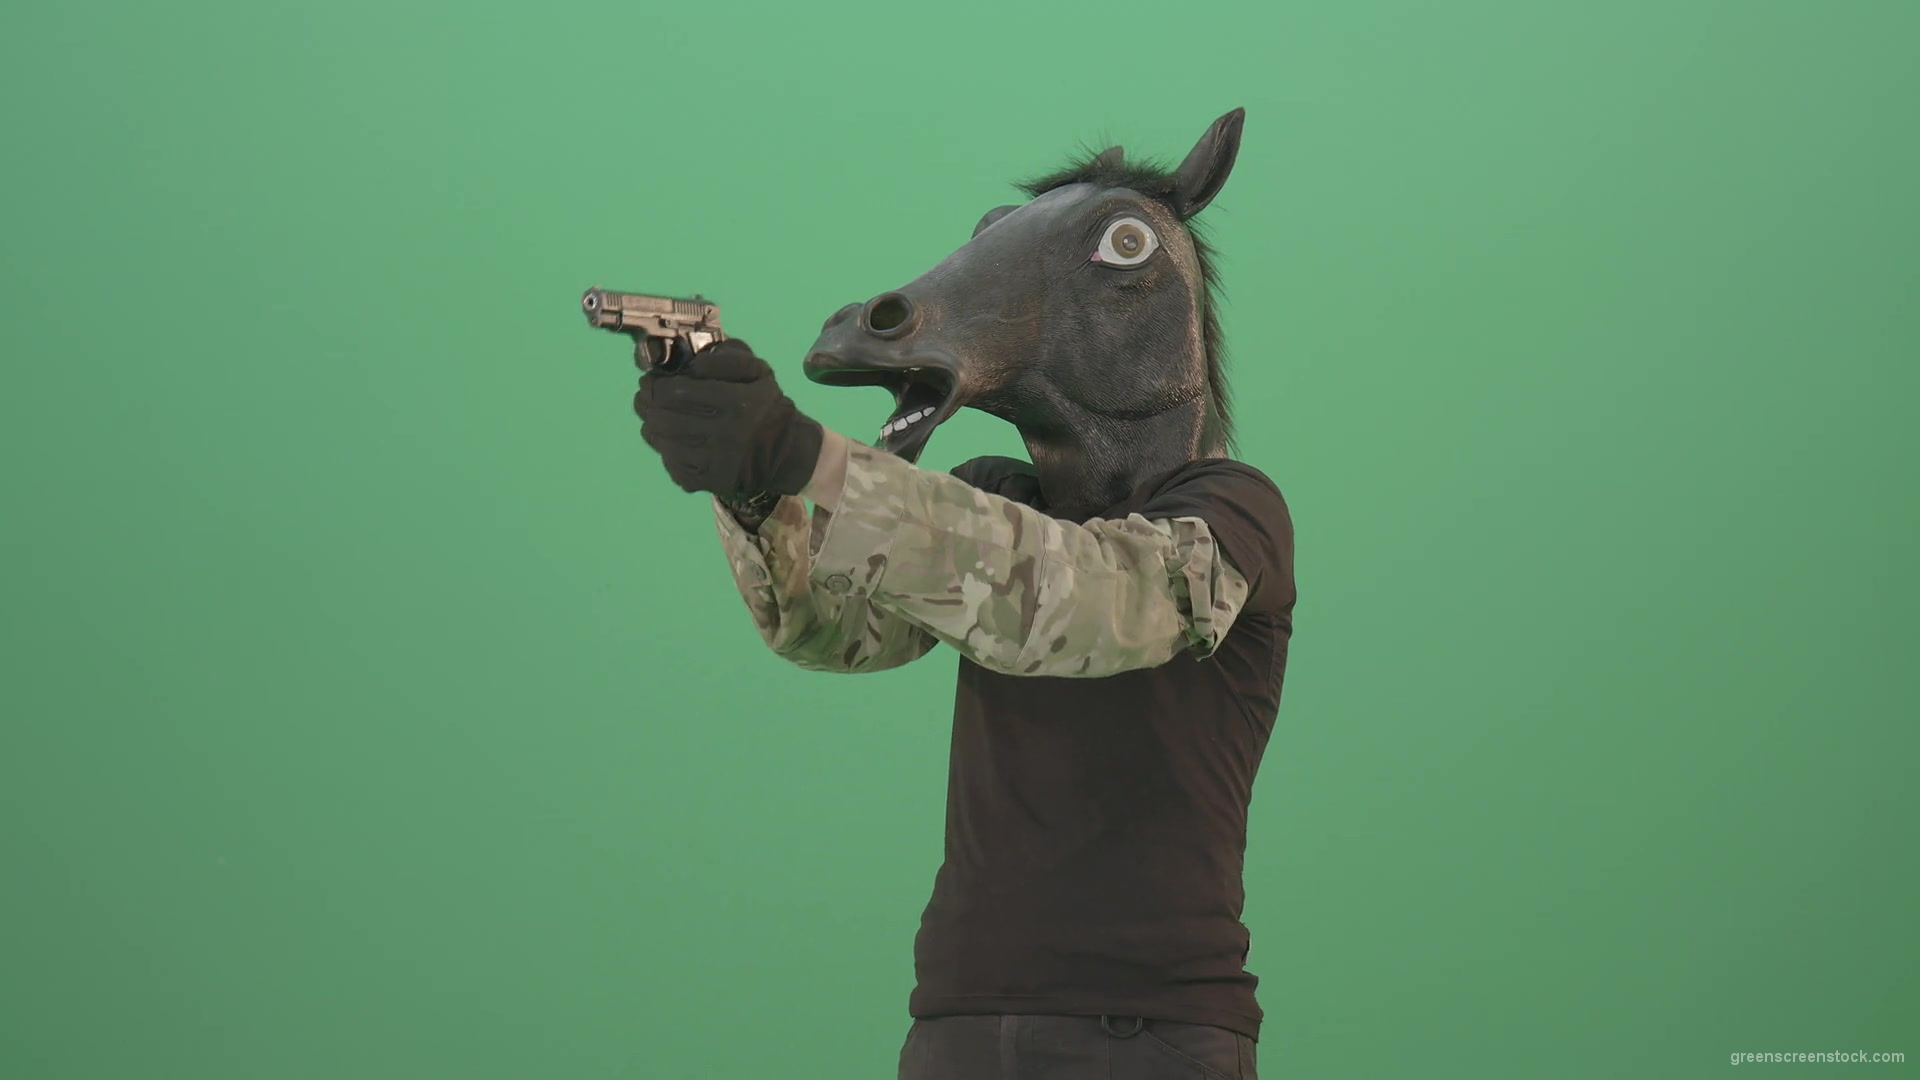 Funny-Horse-Man-in-Mask-shooting-enemies-isolated-on-green-screen-4K-Video-Footage-1920_004 Green Screen Stock